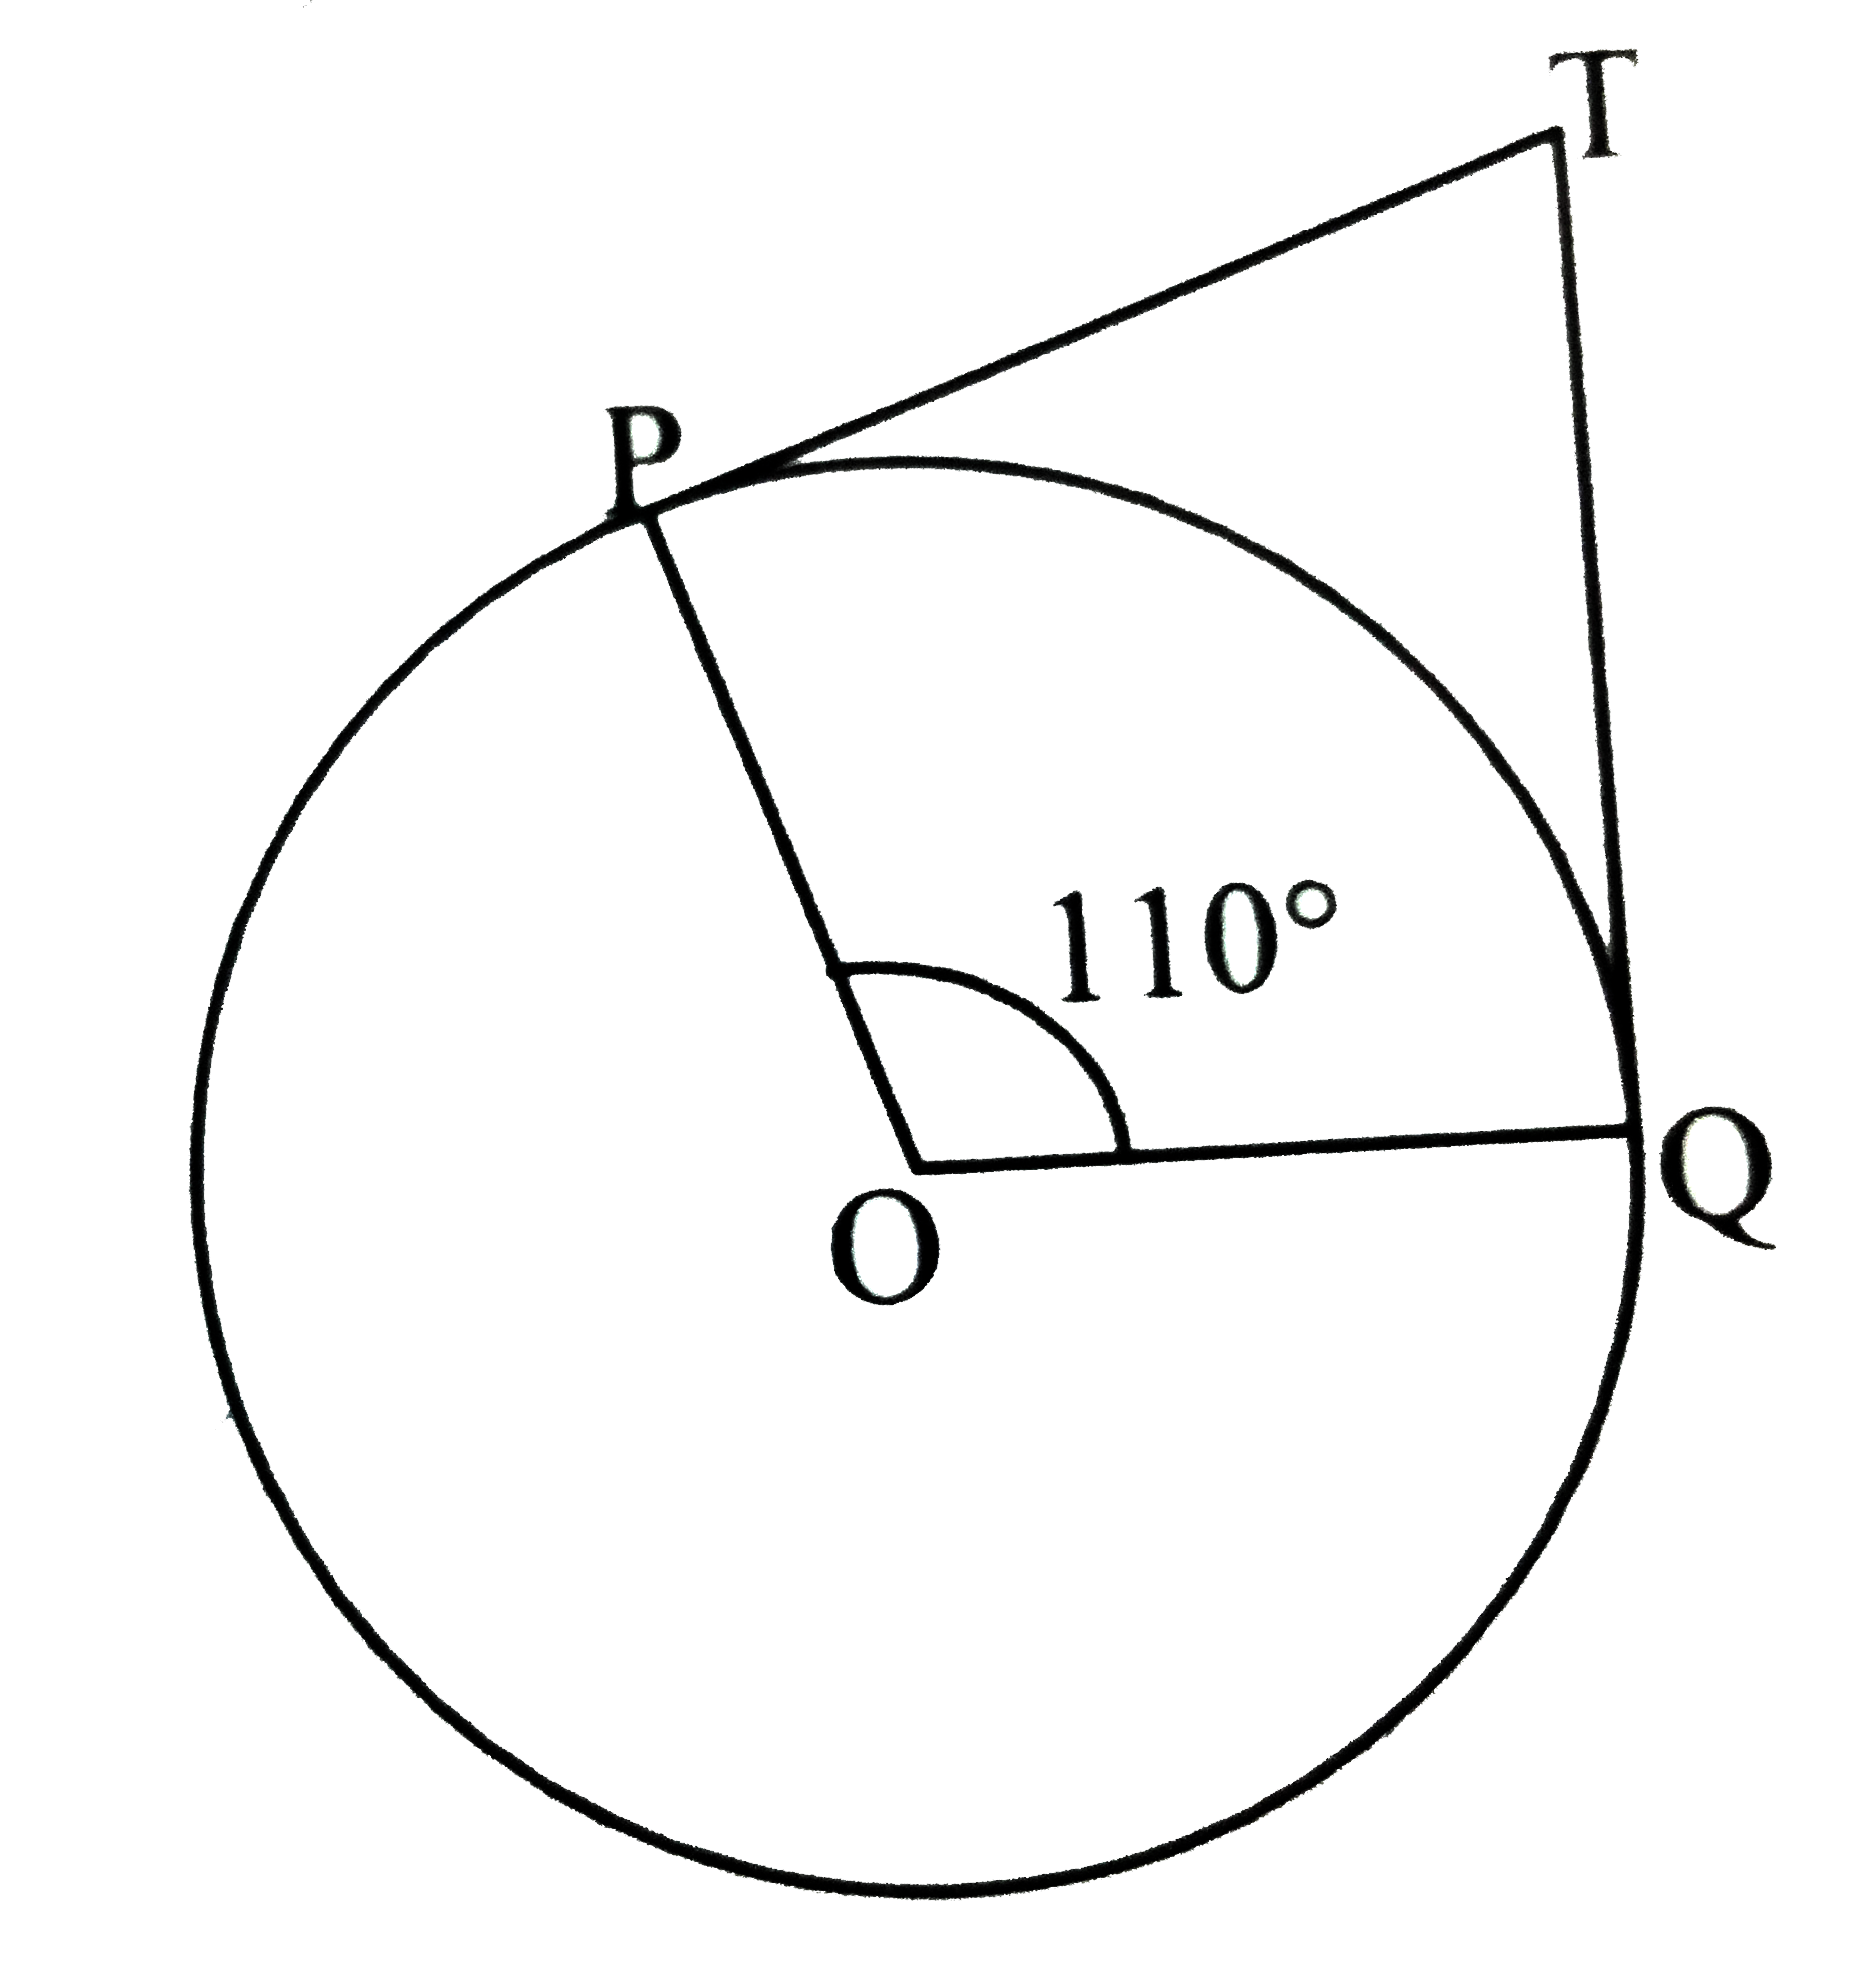 In the given figure , if TP and TQ are the two tangents to a circle with centre O so that anglePOQ=110^@ , then anglePTQ is equal to